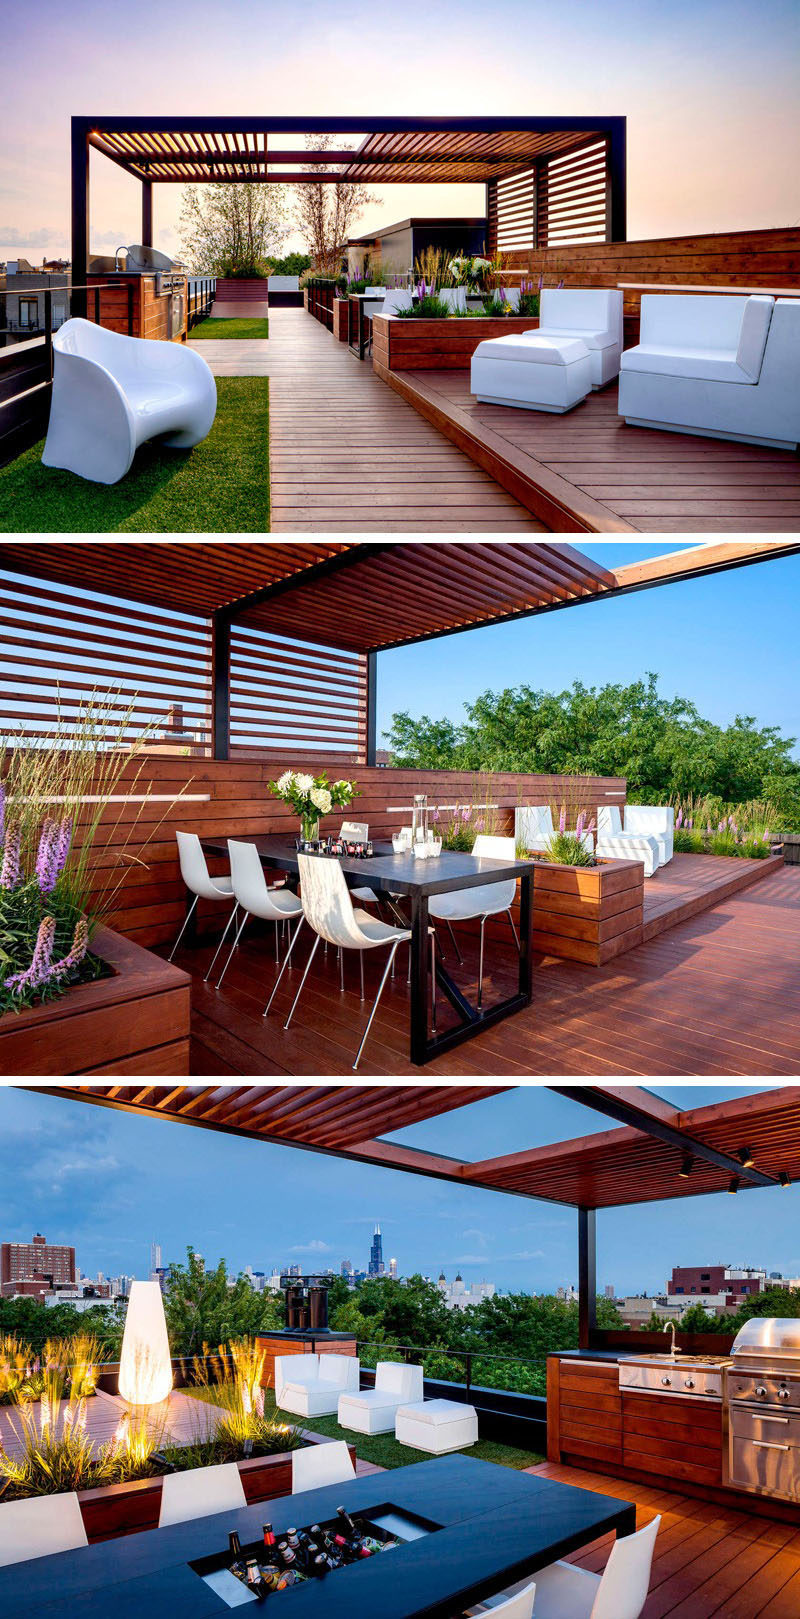 This rooftop entertaining area has all the essentials for hosting a party including ample lounge seating, an outdoor kitchen and dining table located under a pergola, and soft mood lighting.